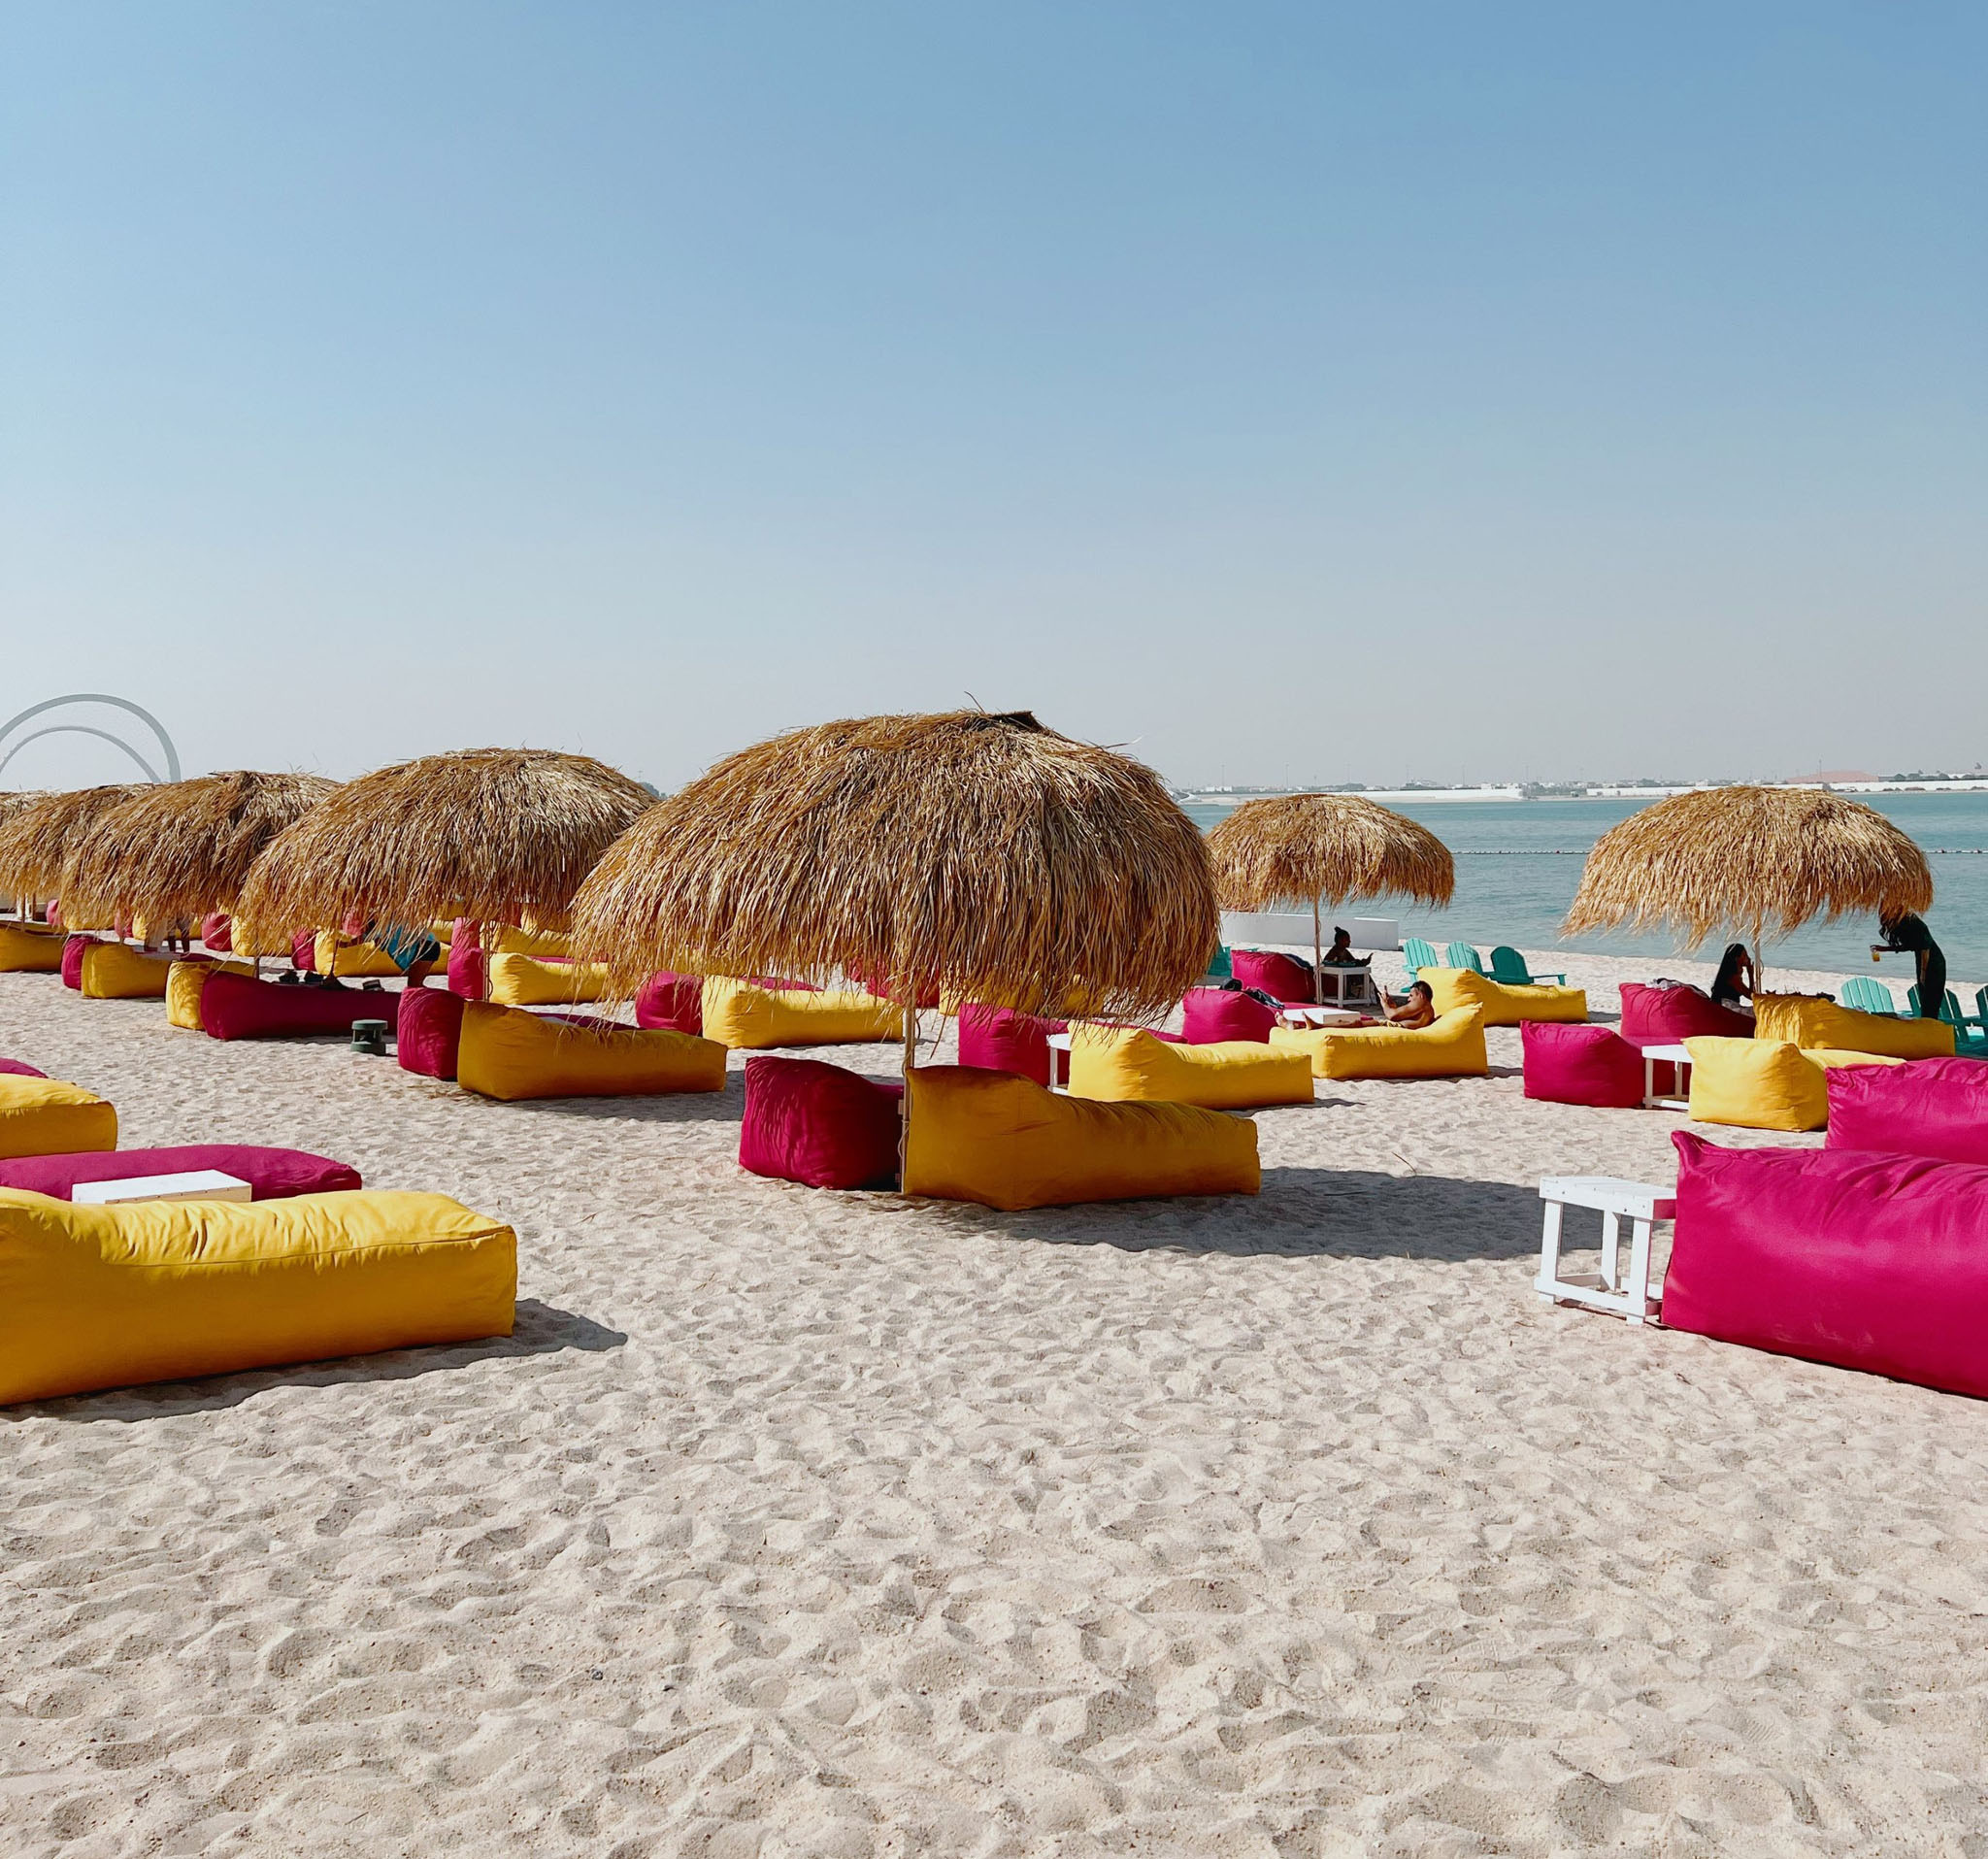 On a sandy beach next to the sea, sun loungers are placed under thatched beach umbrellas. It's day time and the sky is clear except for one thin cloud.